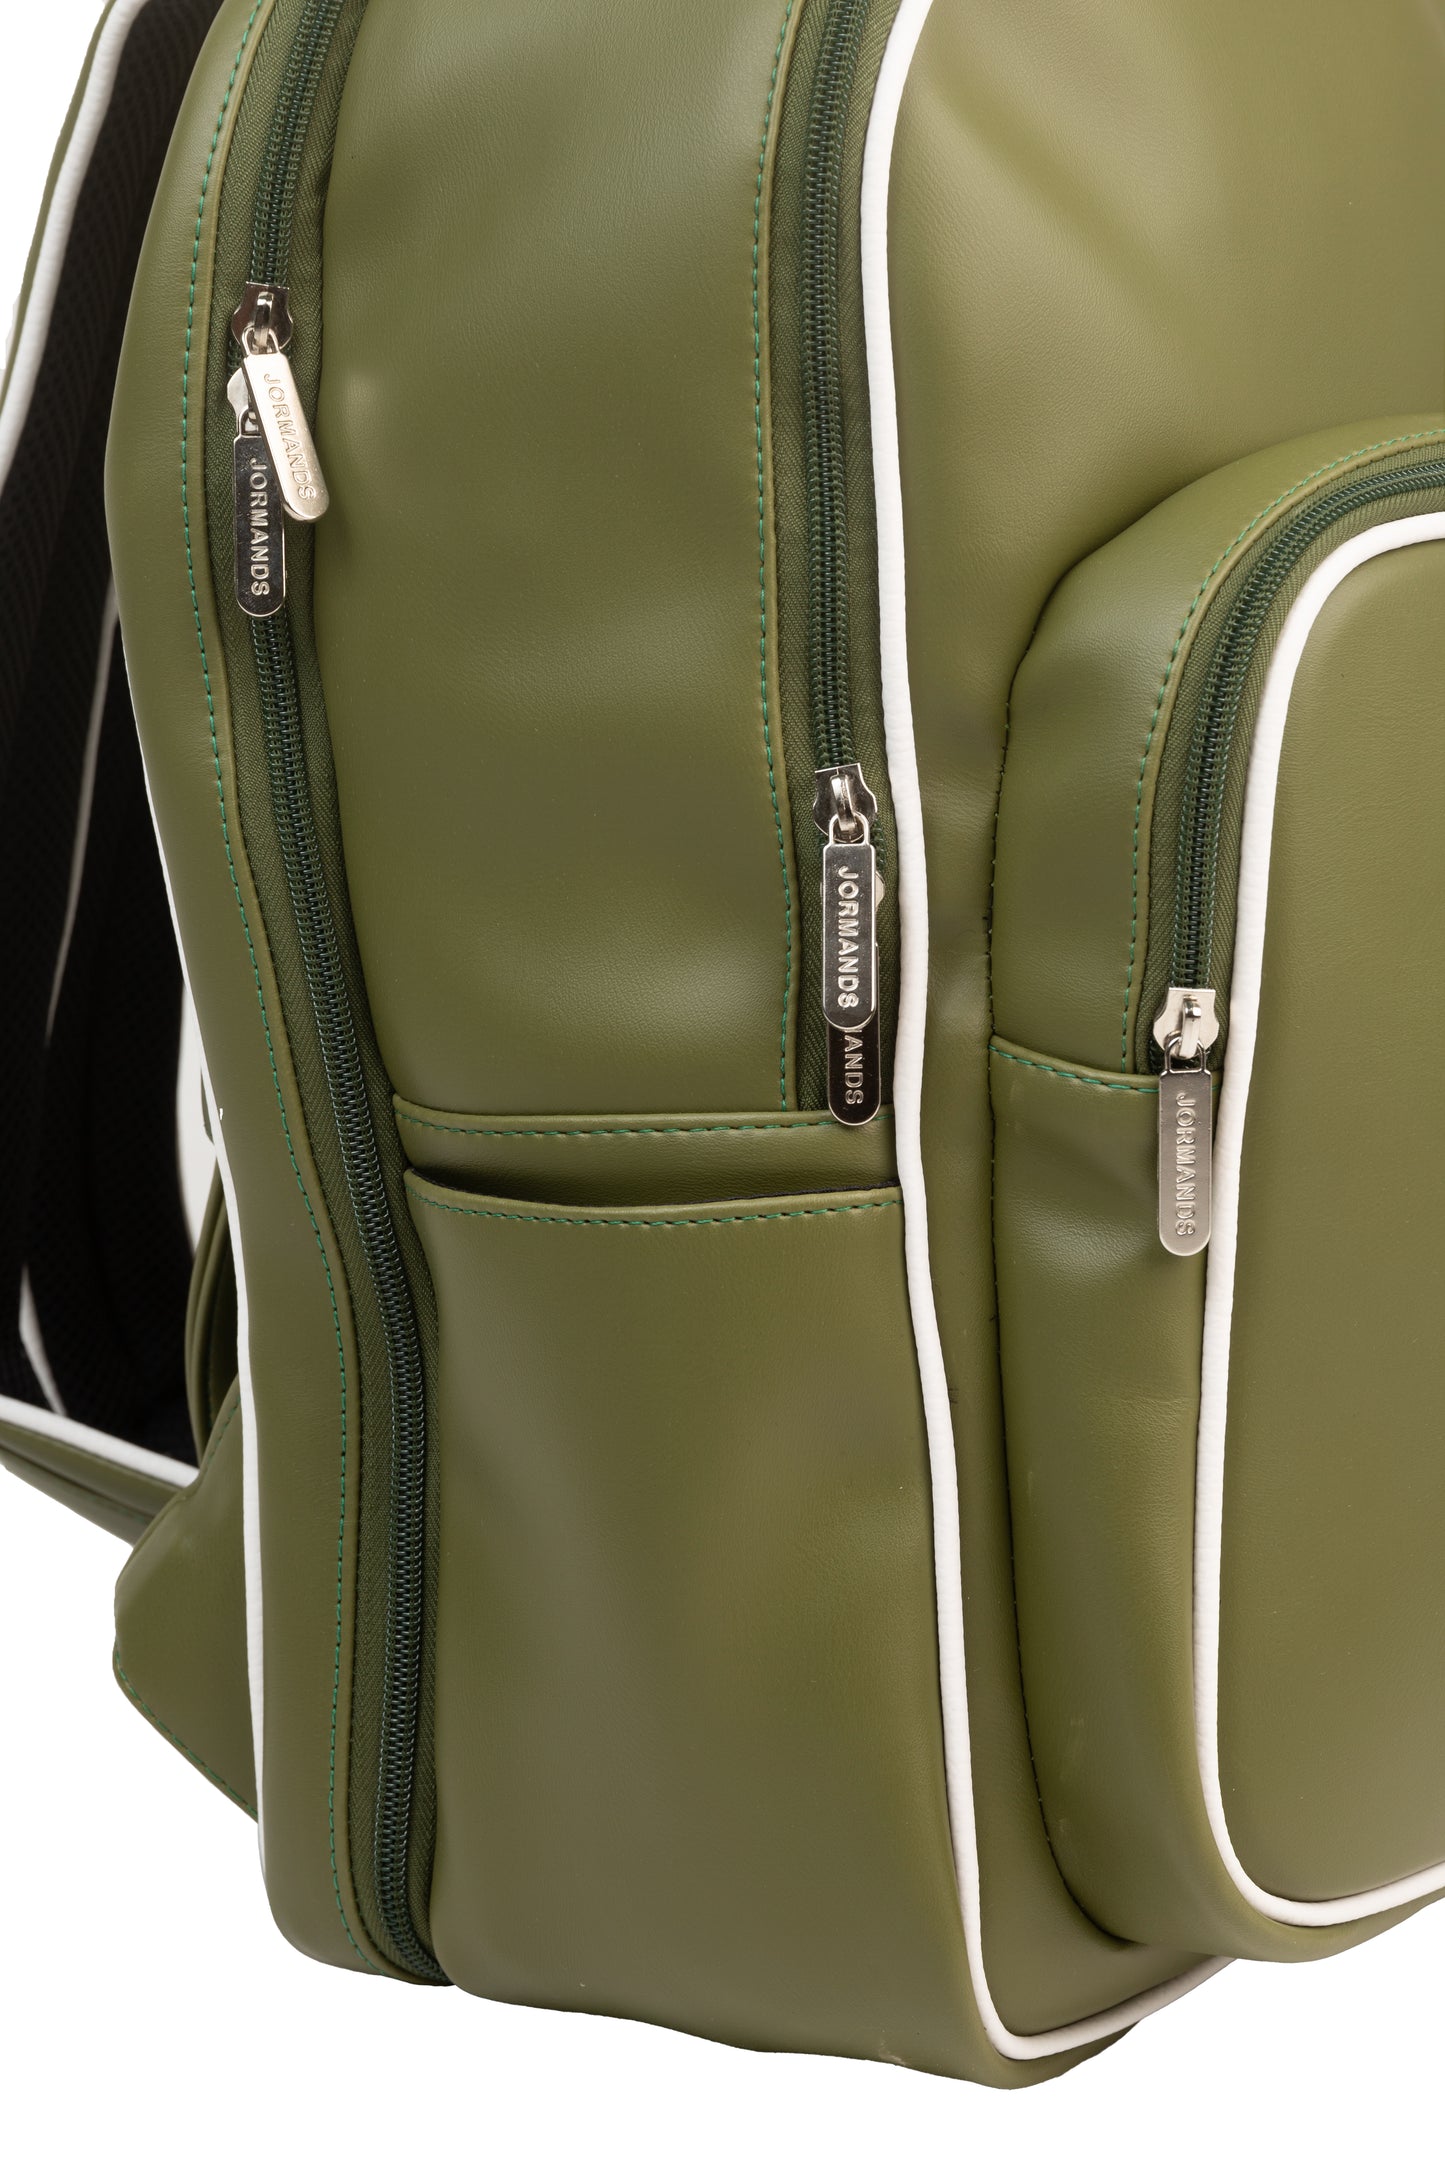 T21 Green Backpack